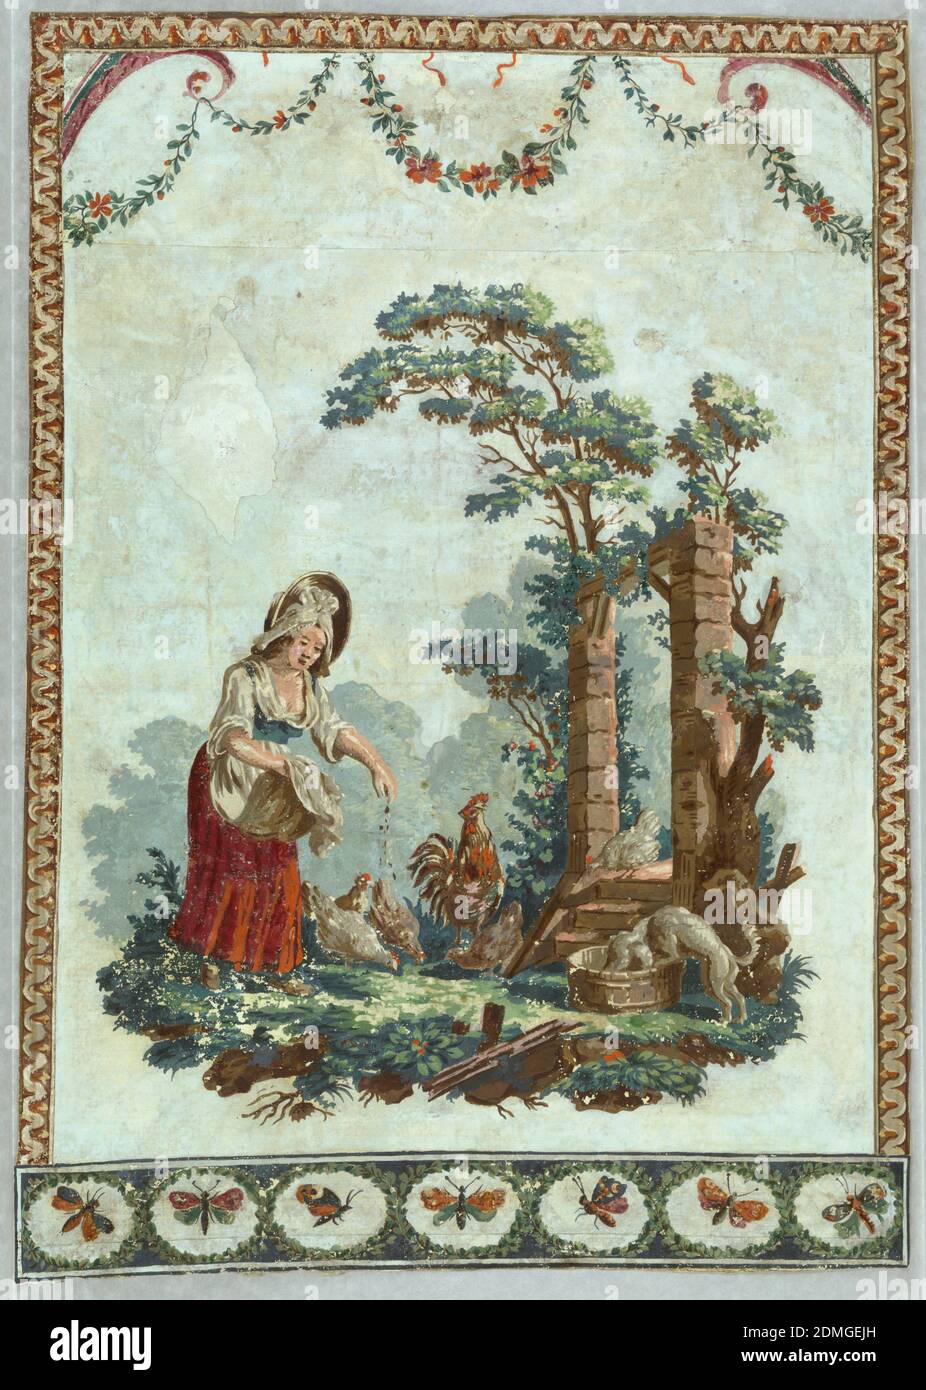 Sidewall and borders, Block-printed on handmade paper, Vertical rectangle. Woman in a red-skirted dress, feeding chickens. Across the bottom is a border of butterflies; across the top a border of festooned flowers and foliage; above this, and along the two sides, a border of simulated cyma reversa molding., Lyon, France, 1780–85, Wallcoverings, Sidewall and borders Stock Photo